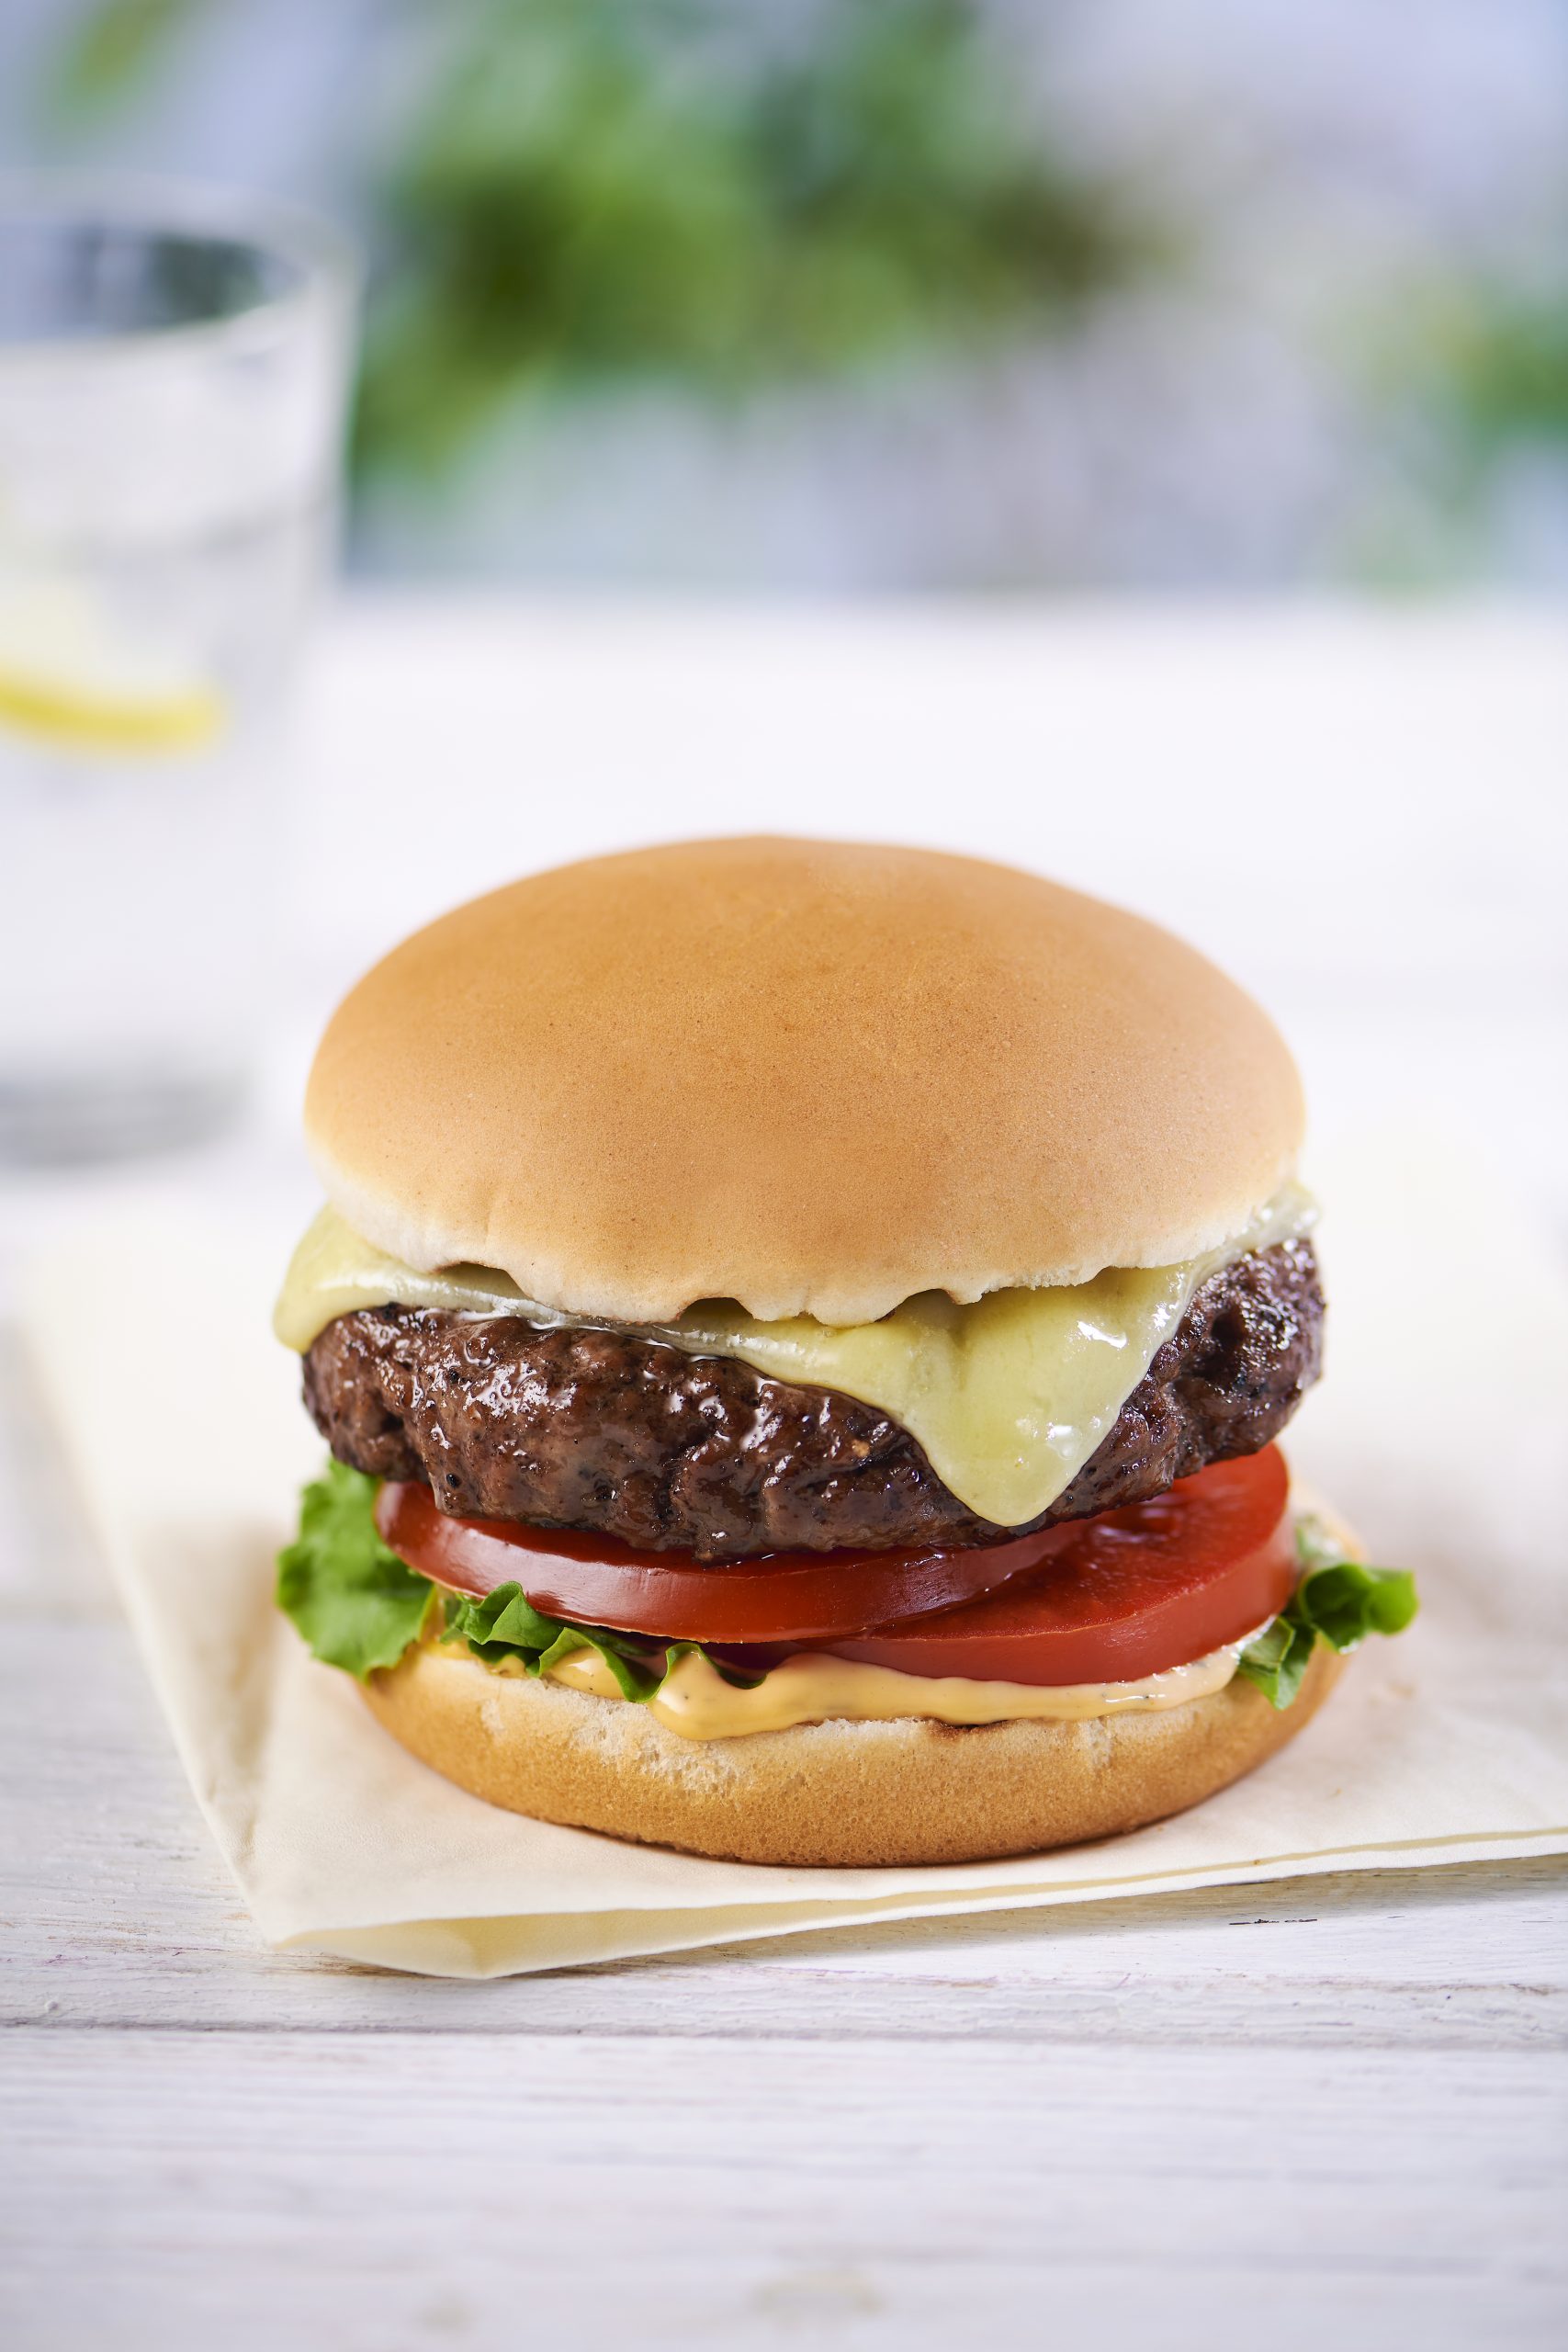 Boost bank holiday burger sales with Baker Street